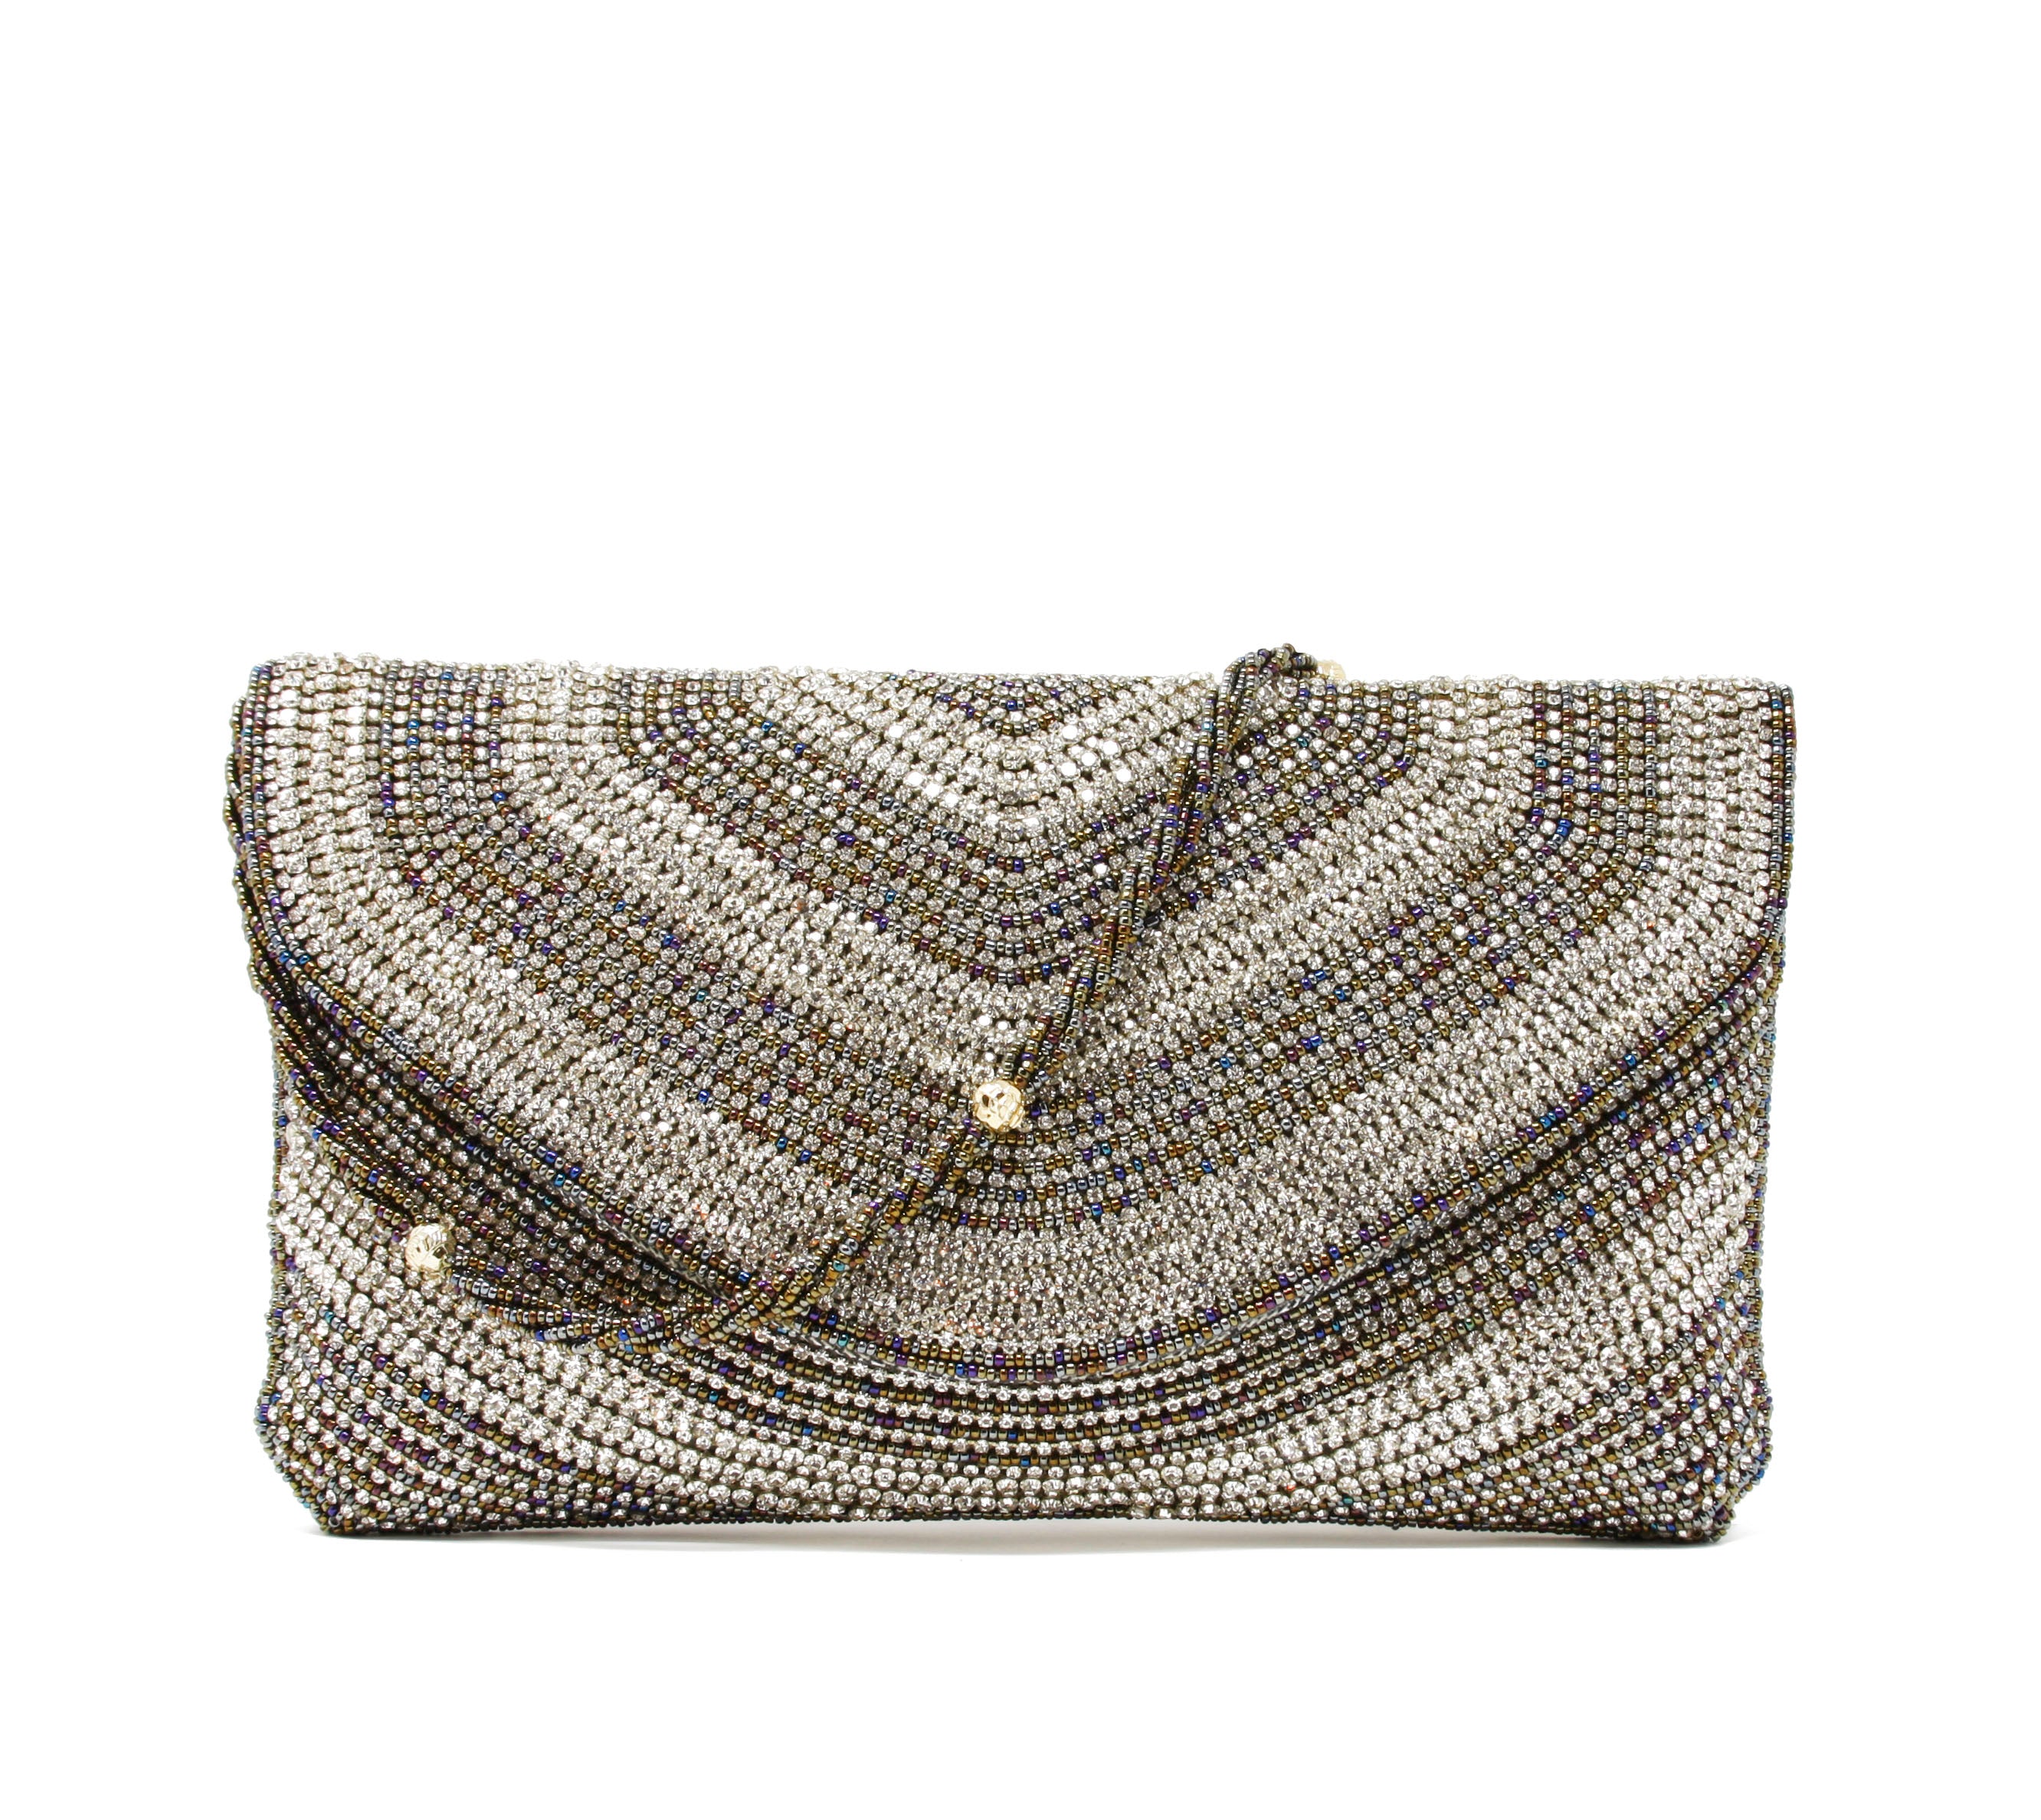 Gold and silver clutch fold-over snap closure, Multi-colored beaded twisting wristlet.